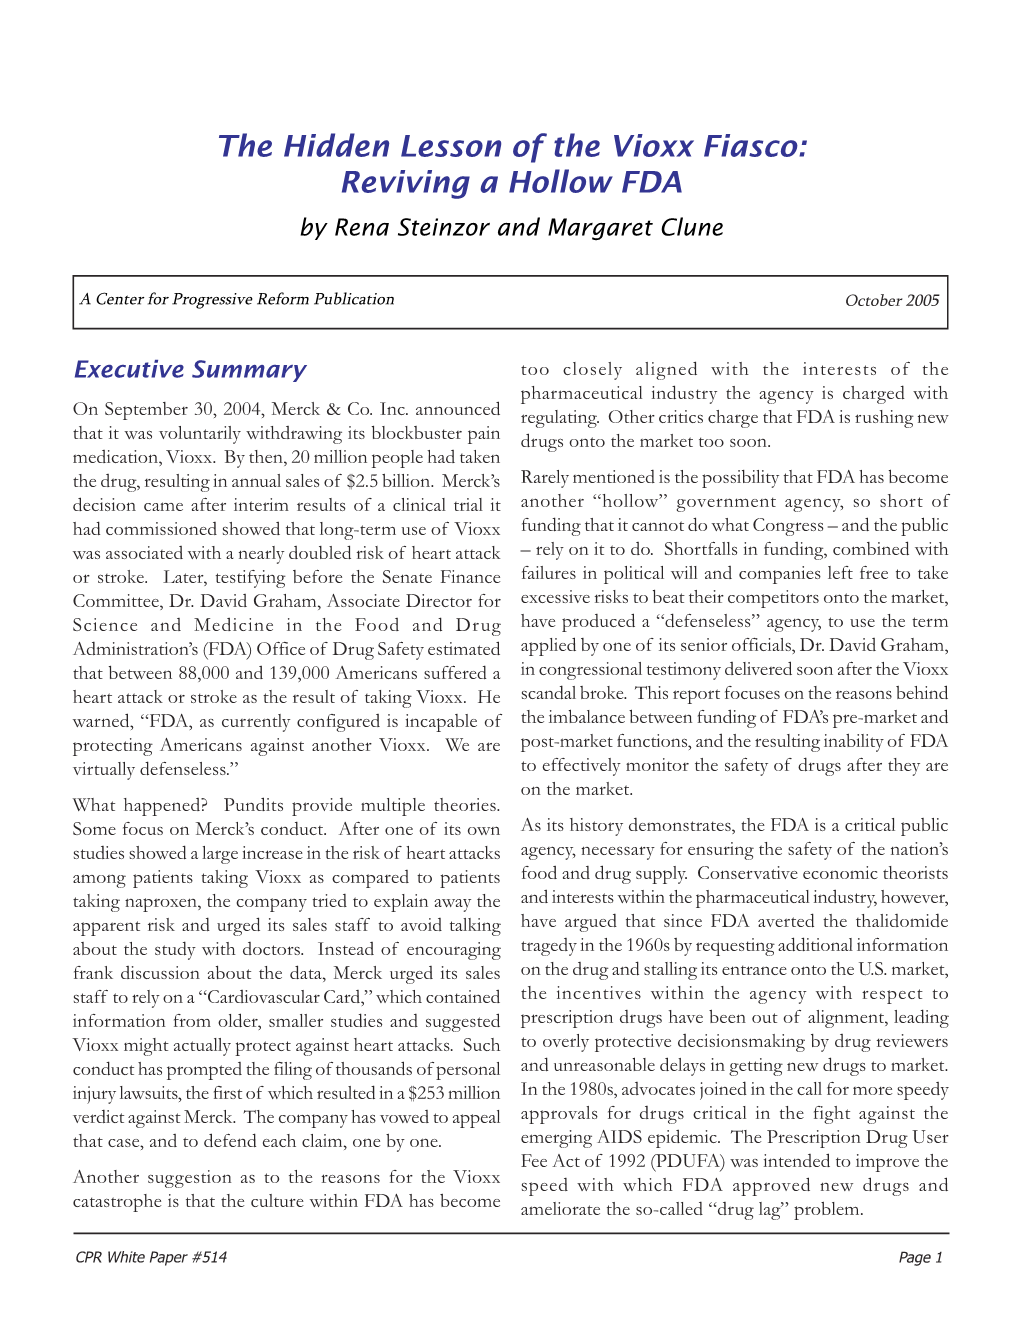 The Hidden Lesson of the Vioxx Fiasco: Reviving a Hollow FDA by Rena Steinzor and Margaret Clune